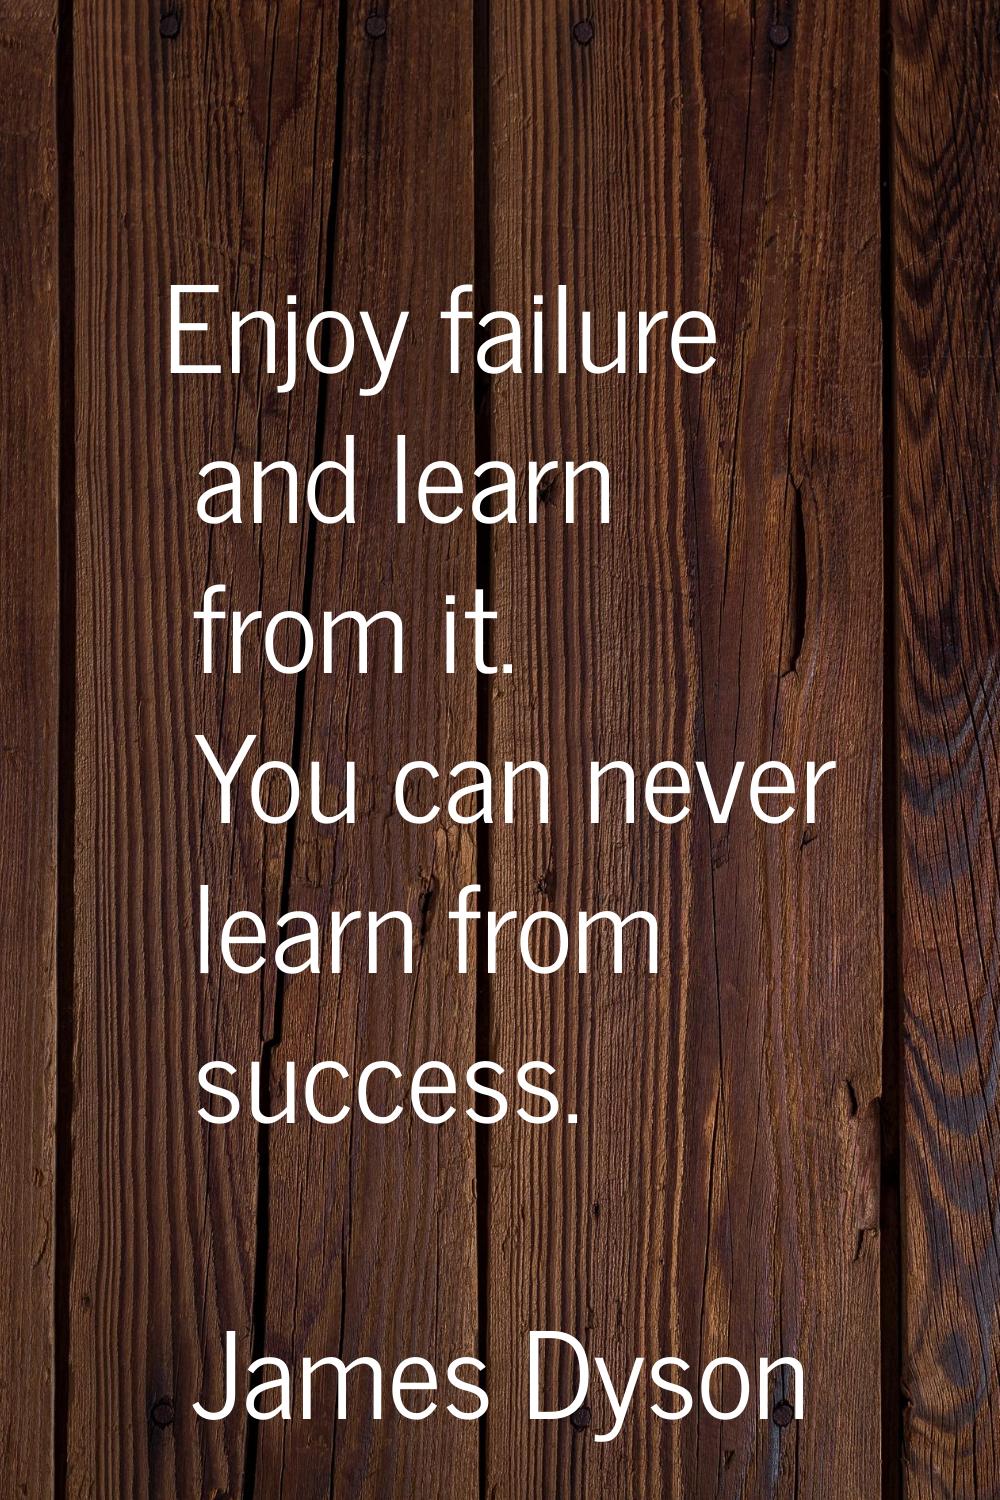 Enjoy failure and learn from it. You can never learn from success.